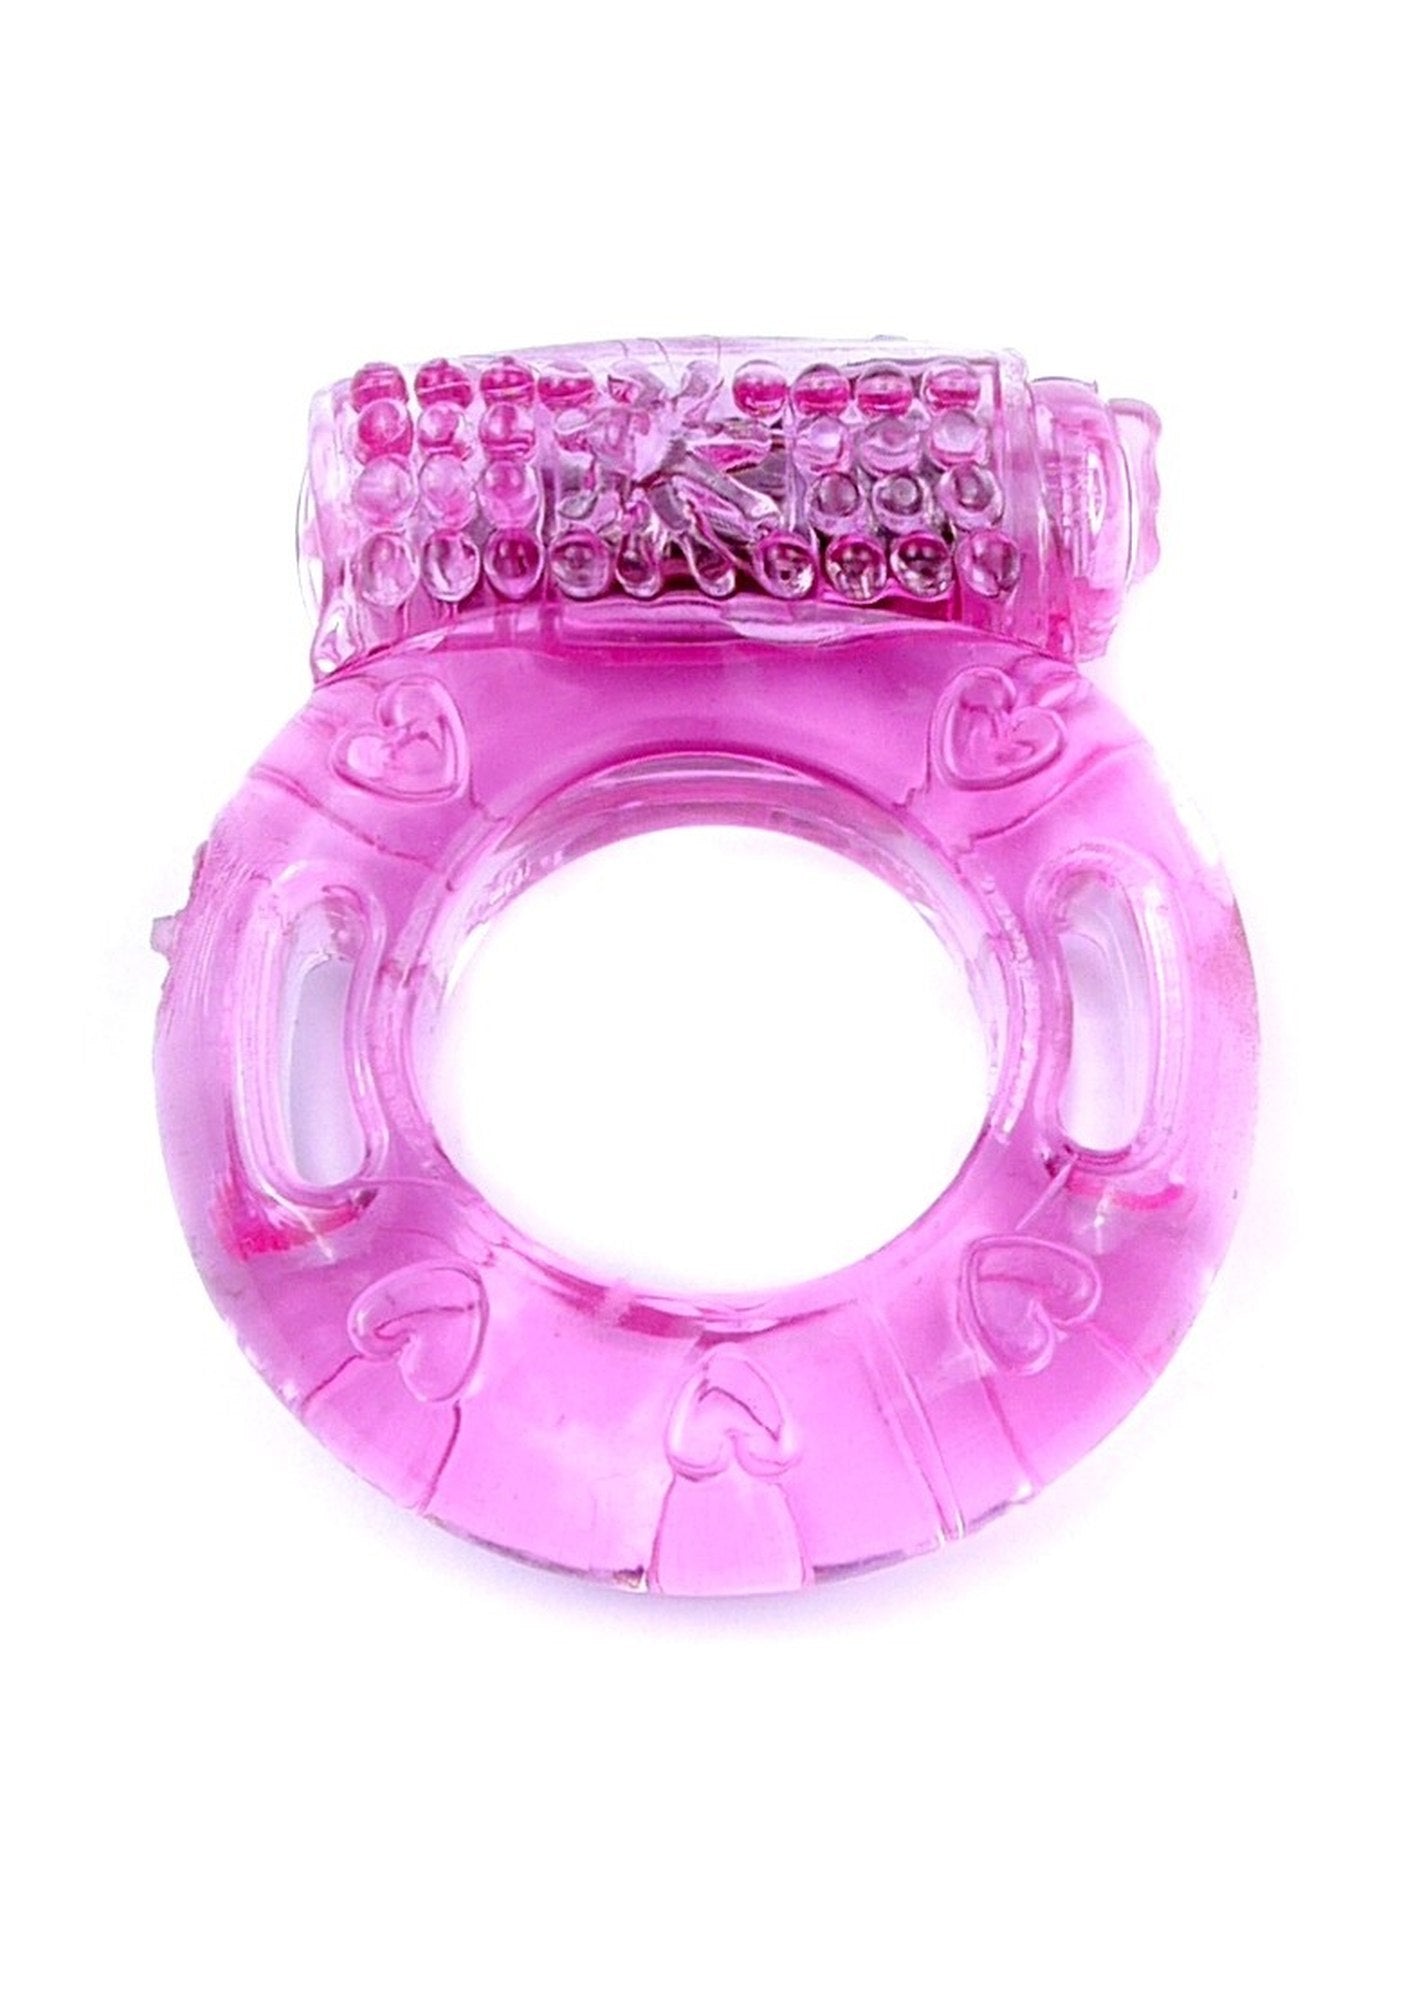 Bossoftoys - 67-00038 - Vibrating Cockring - Pink - batteries included - packed in plastic bag